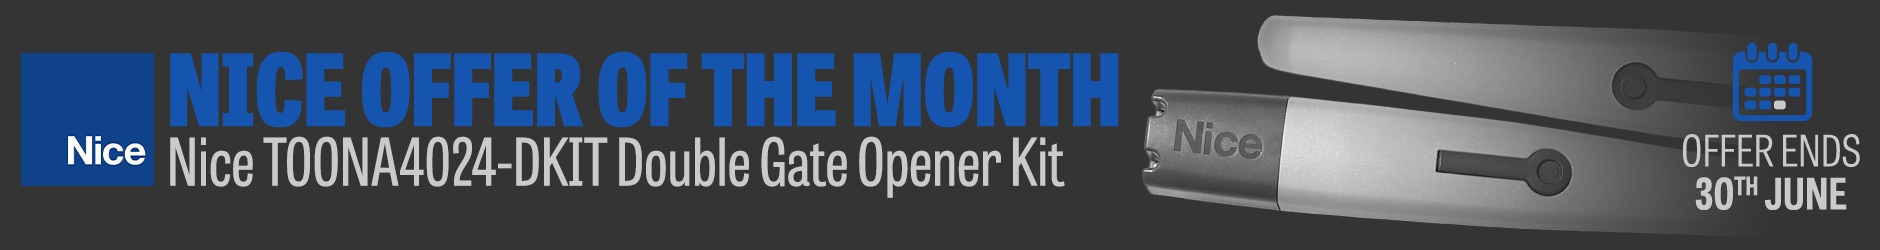 June Offer of the Month: Nice TOONA4024-DKIT